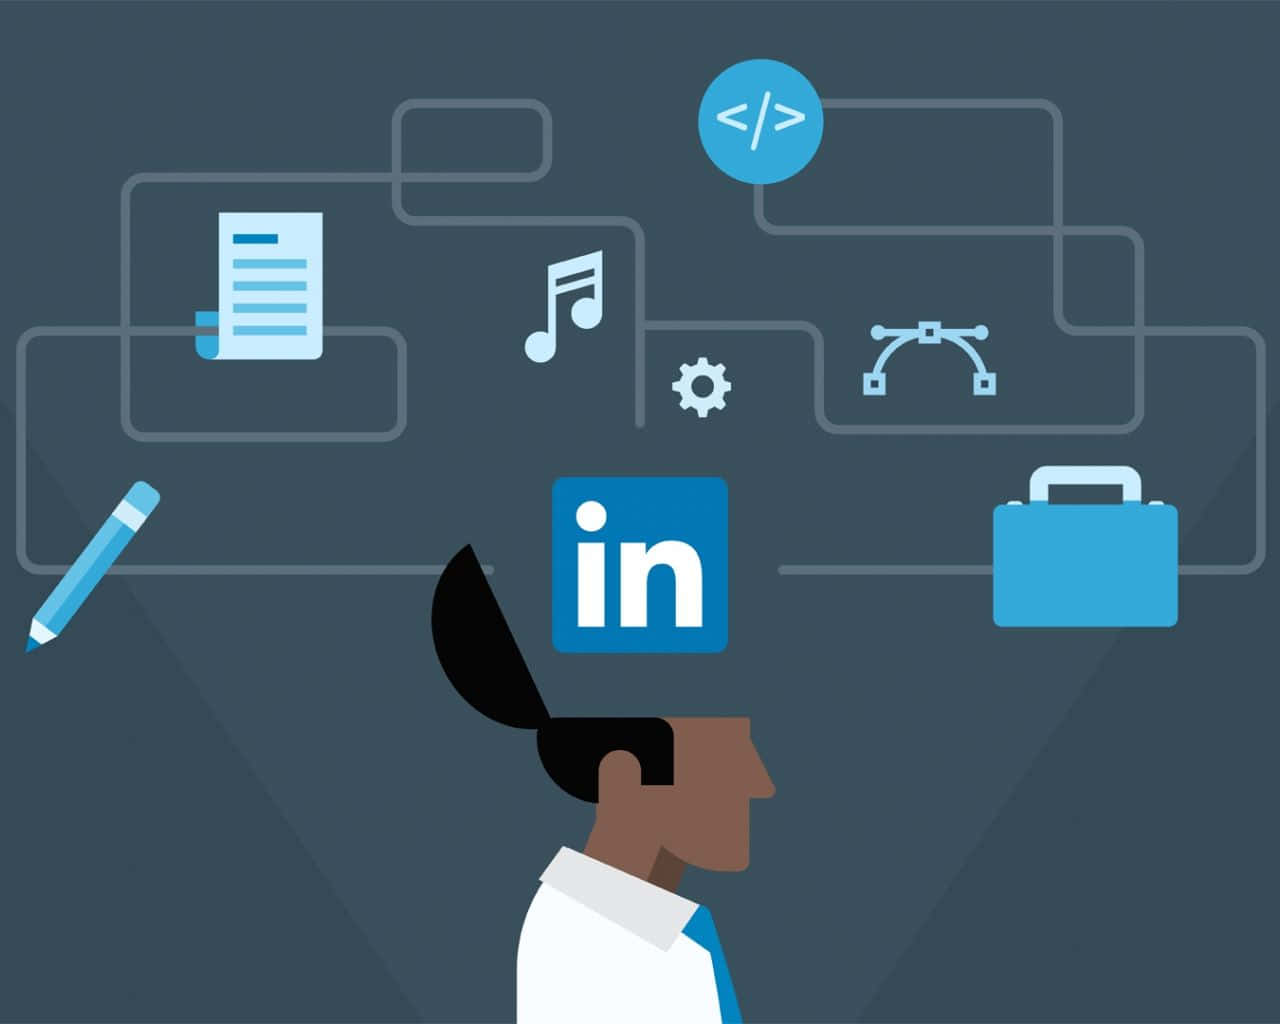 "Your next job opportunity may be just a Linkedin connection away!"